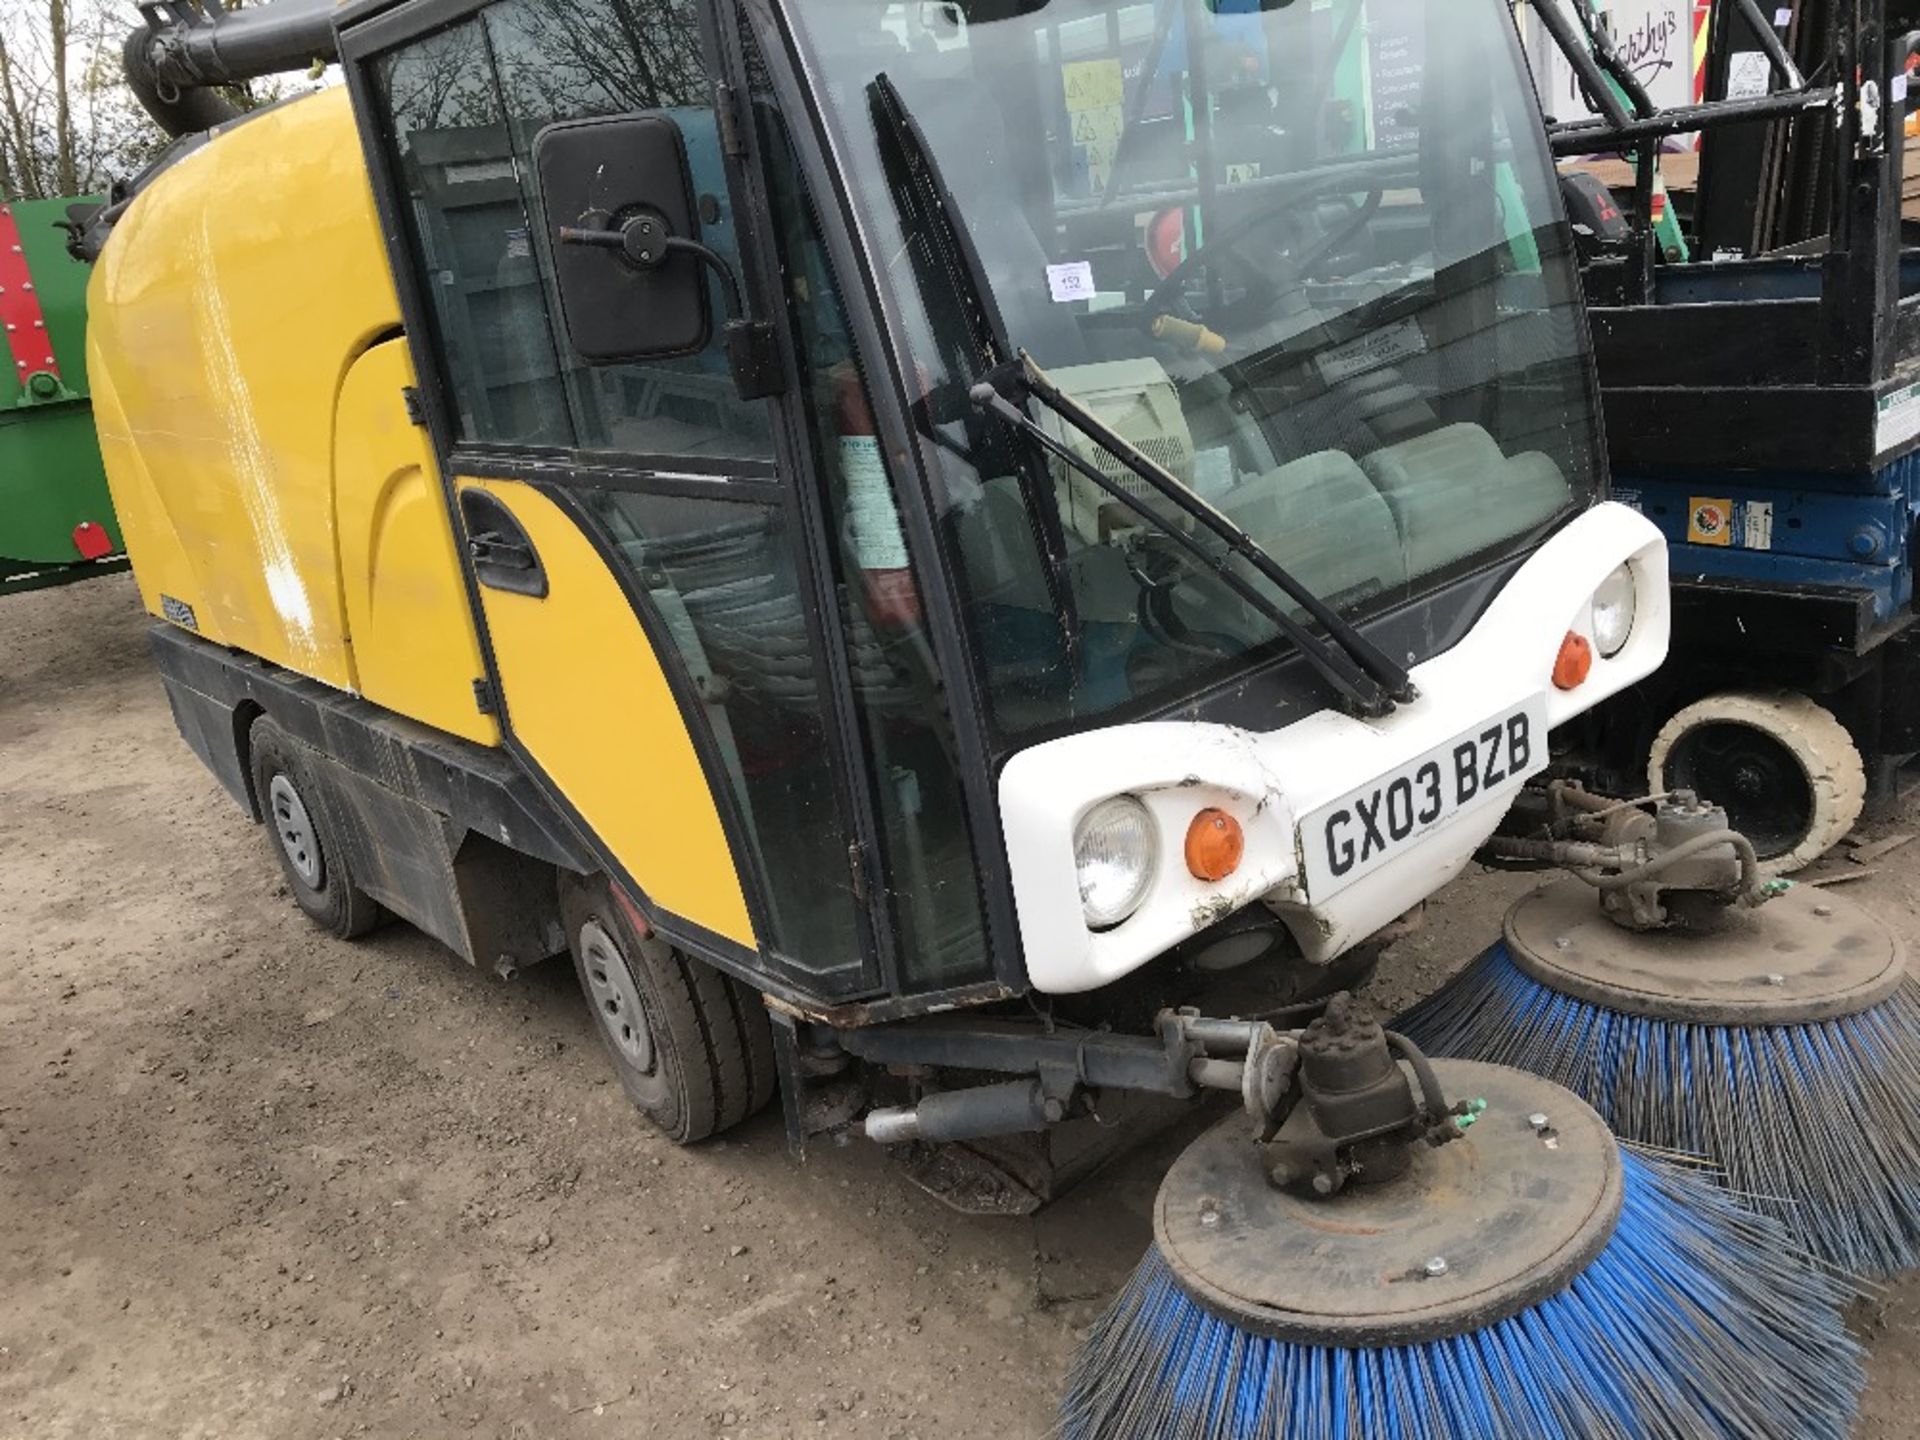 JOHNSON COMPACT SIZED SWEEPER WITH SPARE BRUSHES REG:GX03 BZB WITH V5 when tested was seen to start,